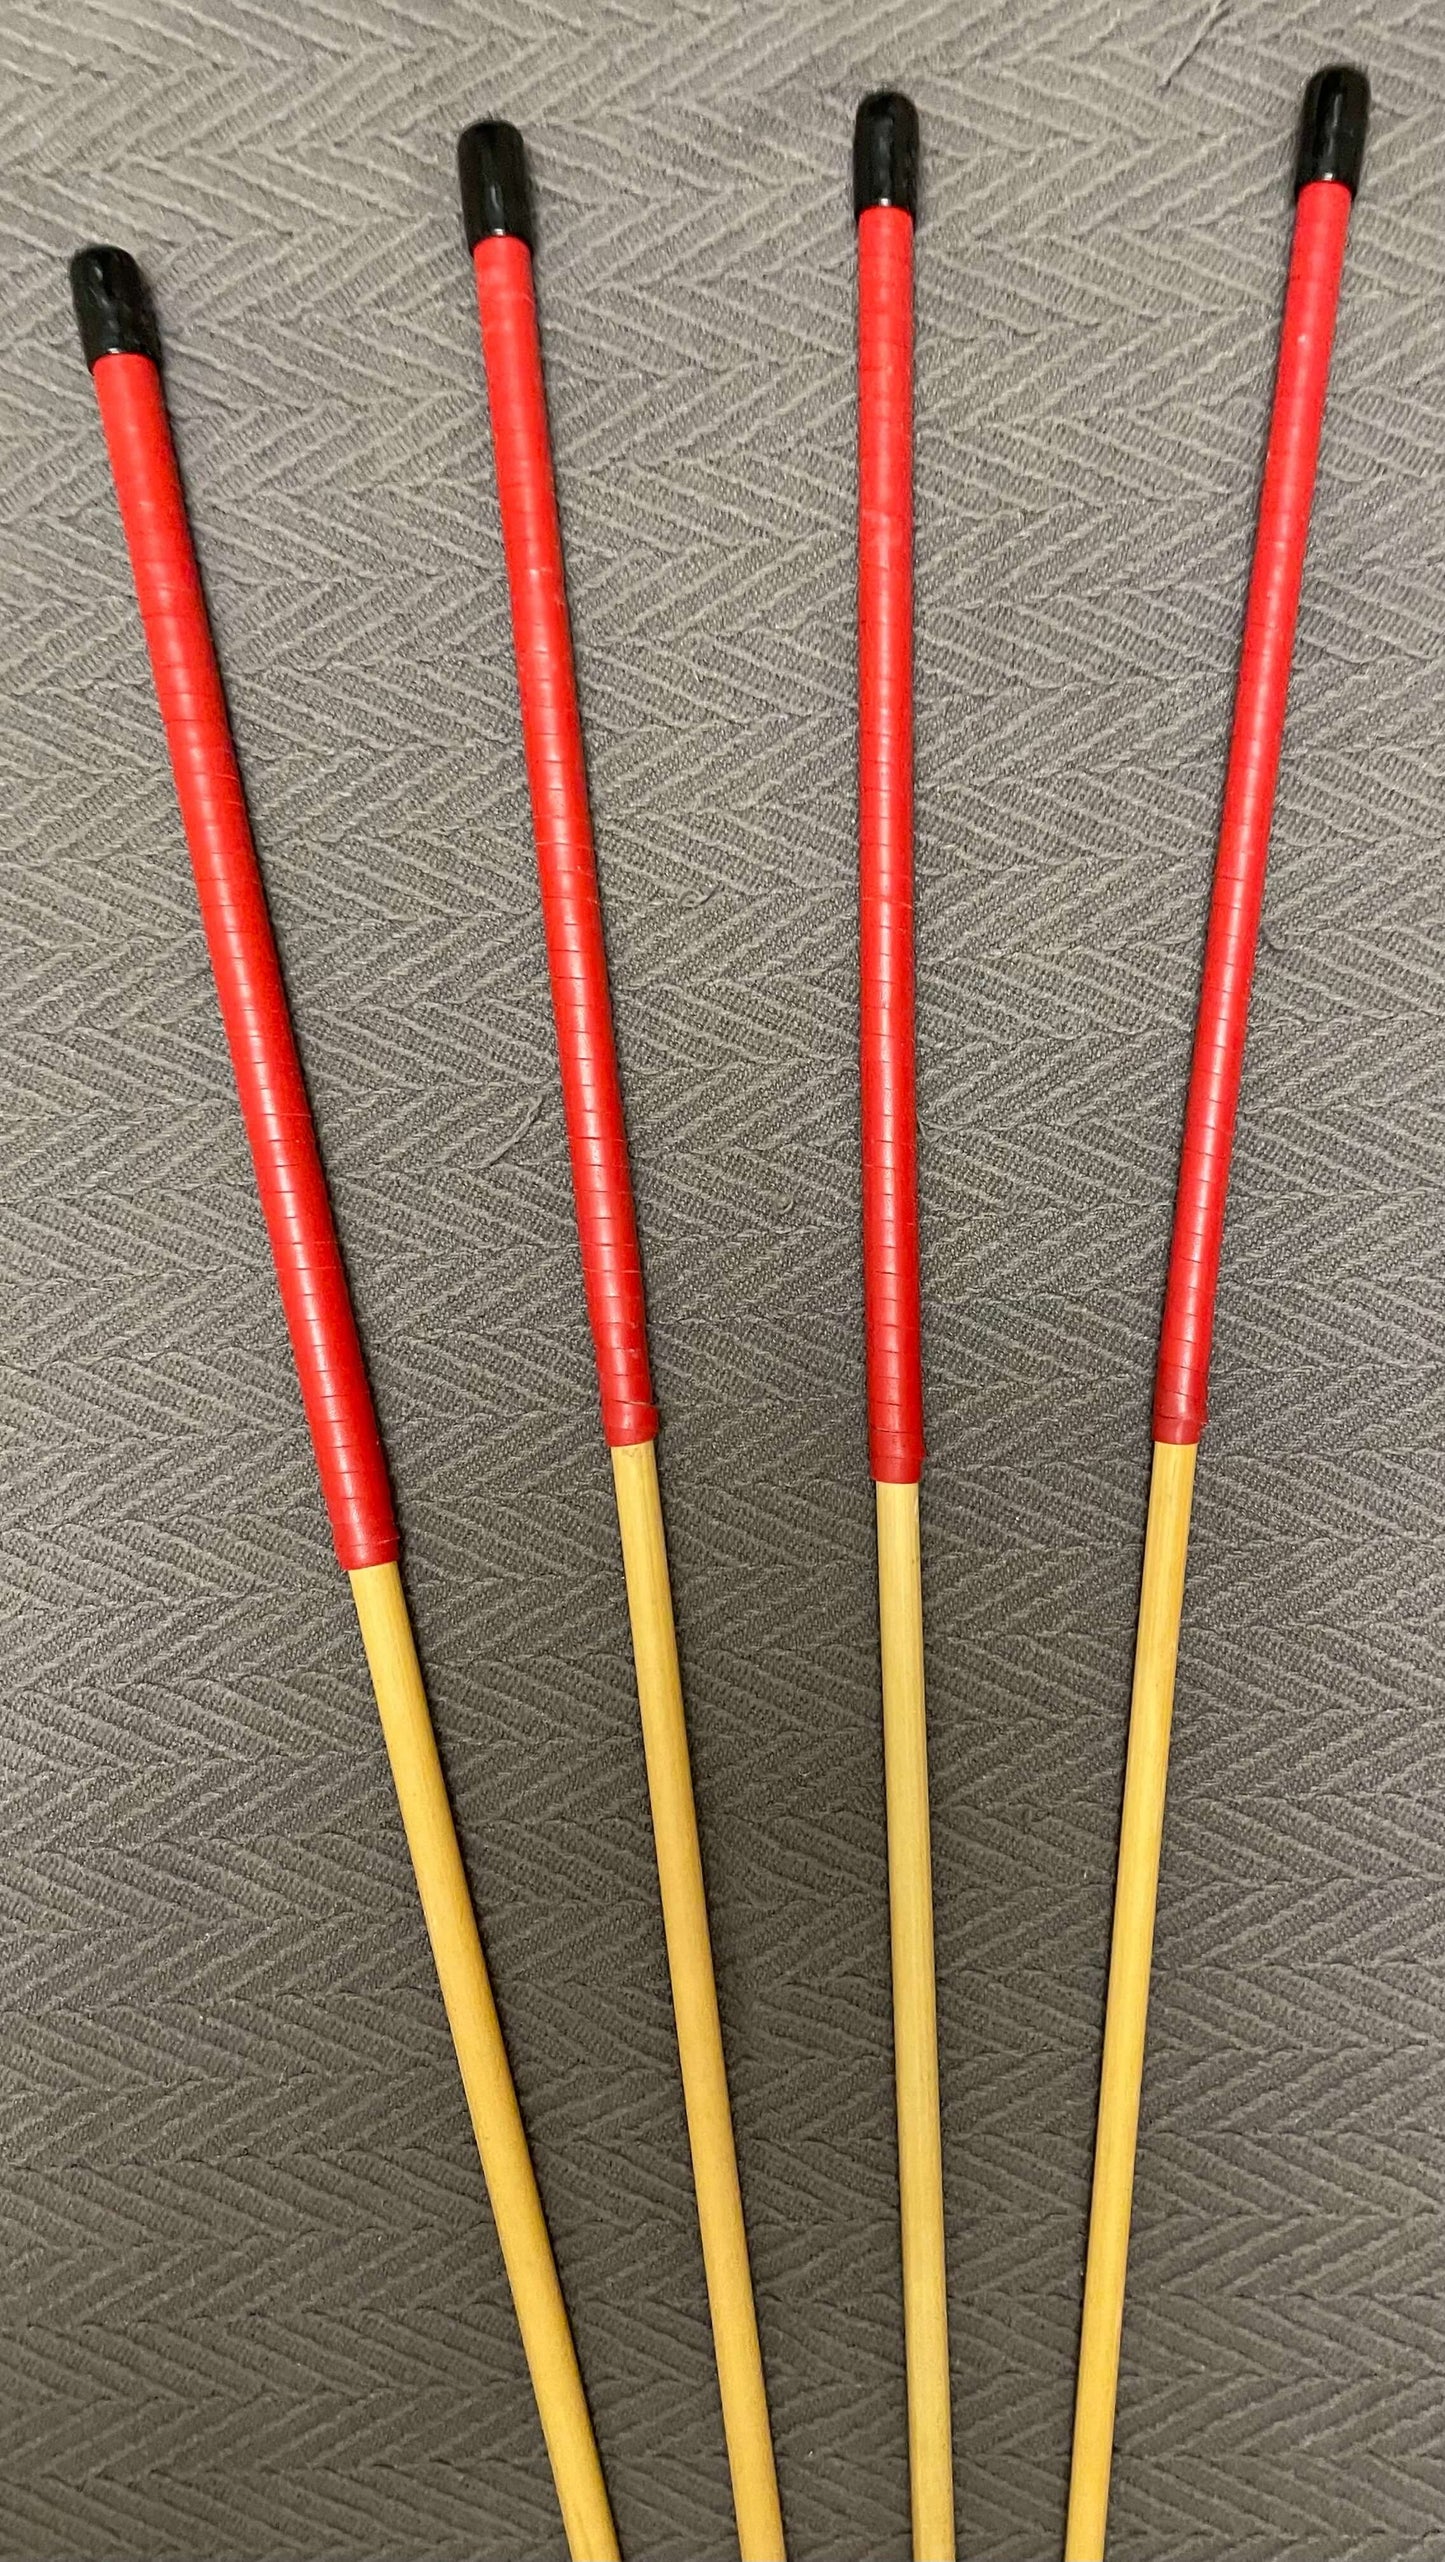 Dragon Cane Professional Deluxe Set of 4 Classic Dragon Canes  - 90 cms L & 8-8.5/9-9.5/10-10.5/11-11.5 mm D - 12" BRANDY or RED Kangaroo Leather Handles